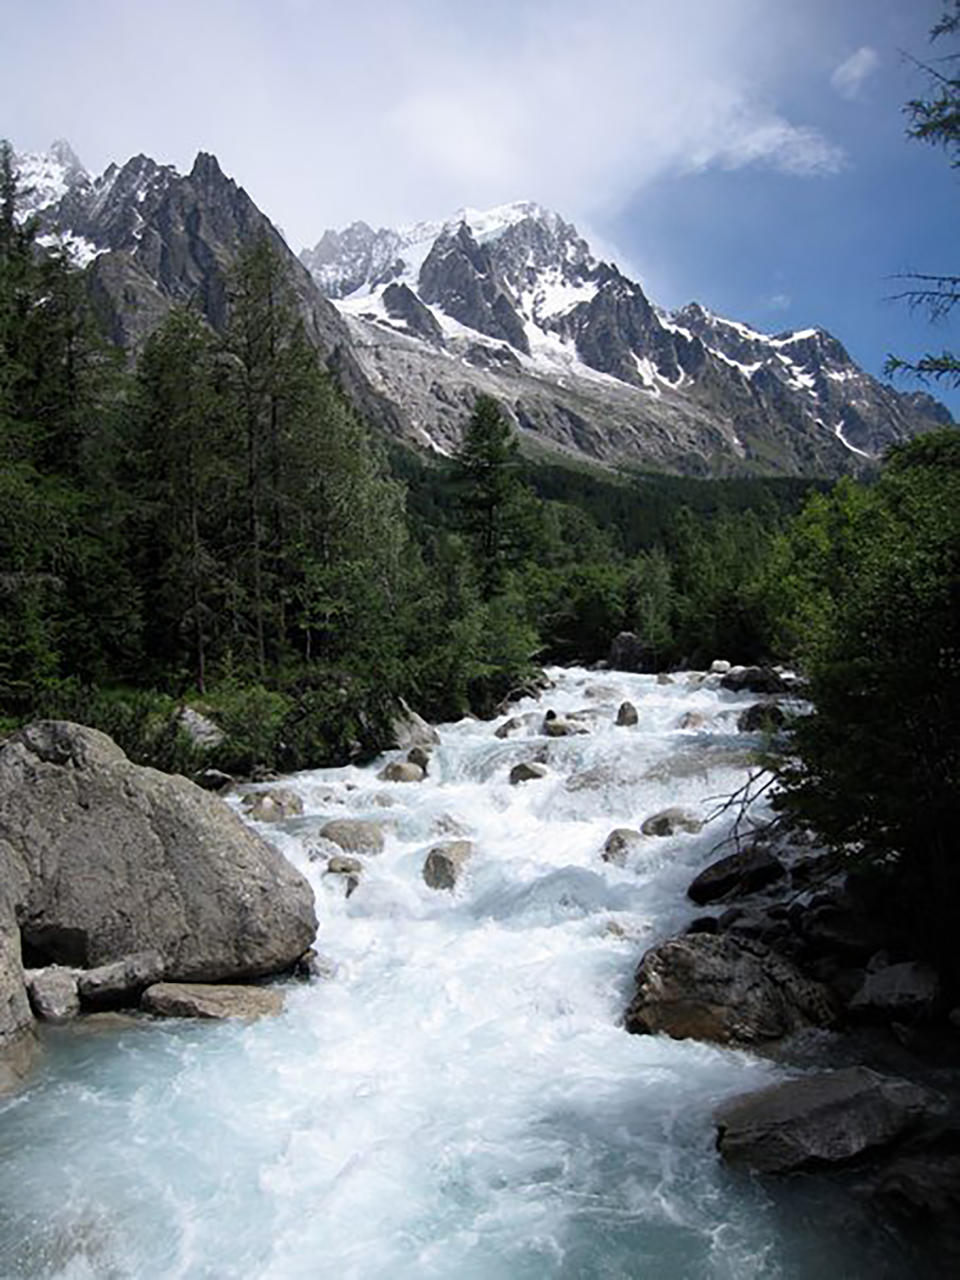 In this photo dated 2009, risk of part of the Planpincieux glacier breaking off amid climate warming in the Alps has prompted Italian authorities to forbid hikers and tourists from a section of the Val Ferrat area, shown in this June 2009 photo from the famed Tour du Mont Blanc trail outside Courmayeur, Italy. The fast-moving Italian glacier is melting quickly, threatening the picturesque valley near the Alpine town of Courmayeur and prompting Mayor Stefano Miserocchi to close down a mountain road. (AP Photo / Randall Hackley)